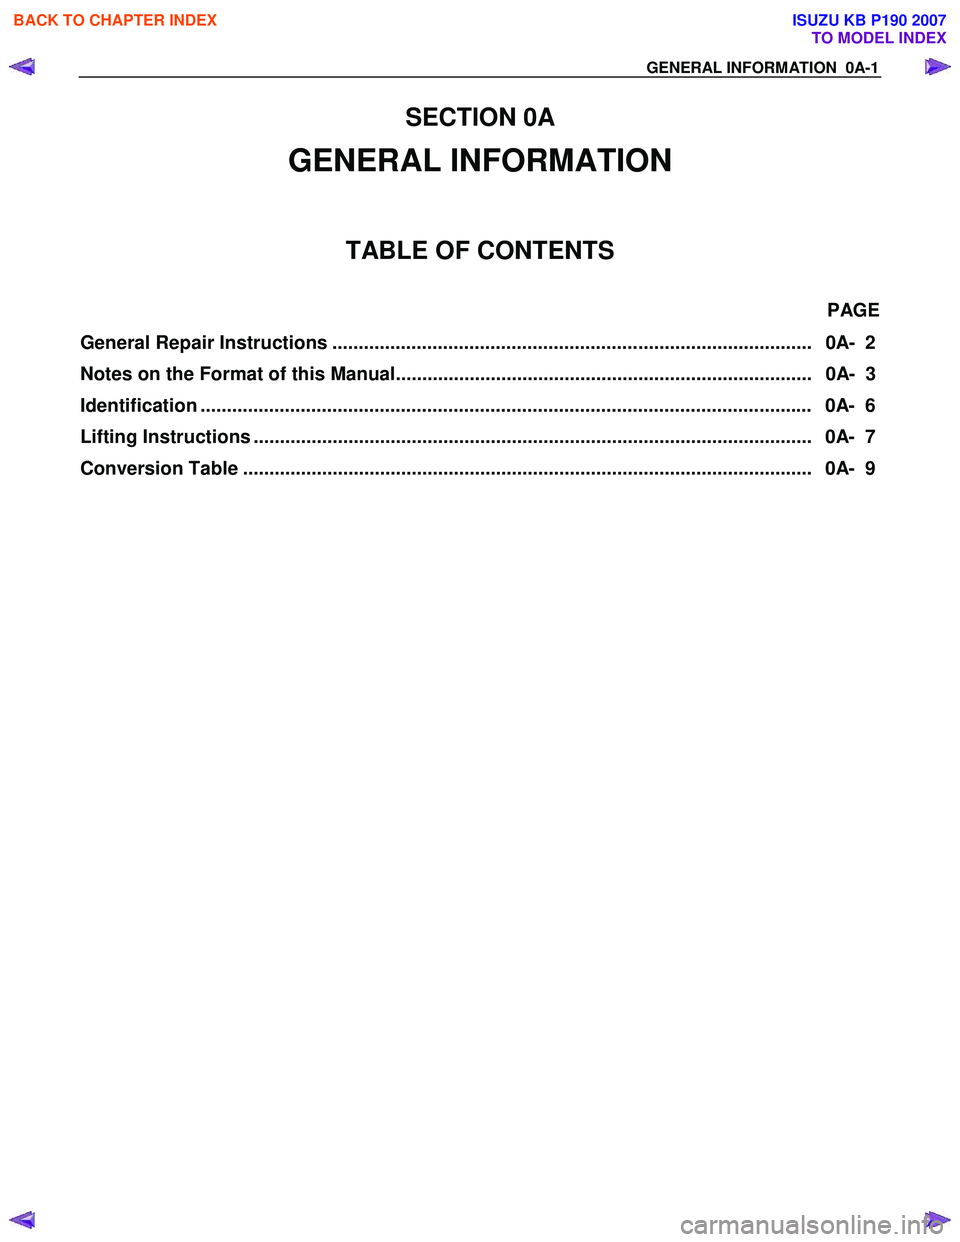 ISUZU KB P190 2007  Workshop Repair Manual  
 
SECTION 0A  
GENERAL I NFORMATI ON 
TABLE OF CONTENTS 
GE NERA L INFORM ATION  0A -1 
General Repair Inst ructions .................................................................................